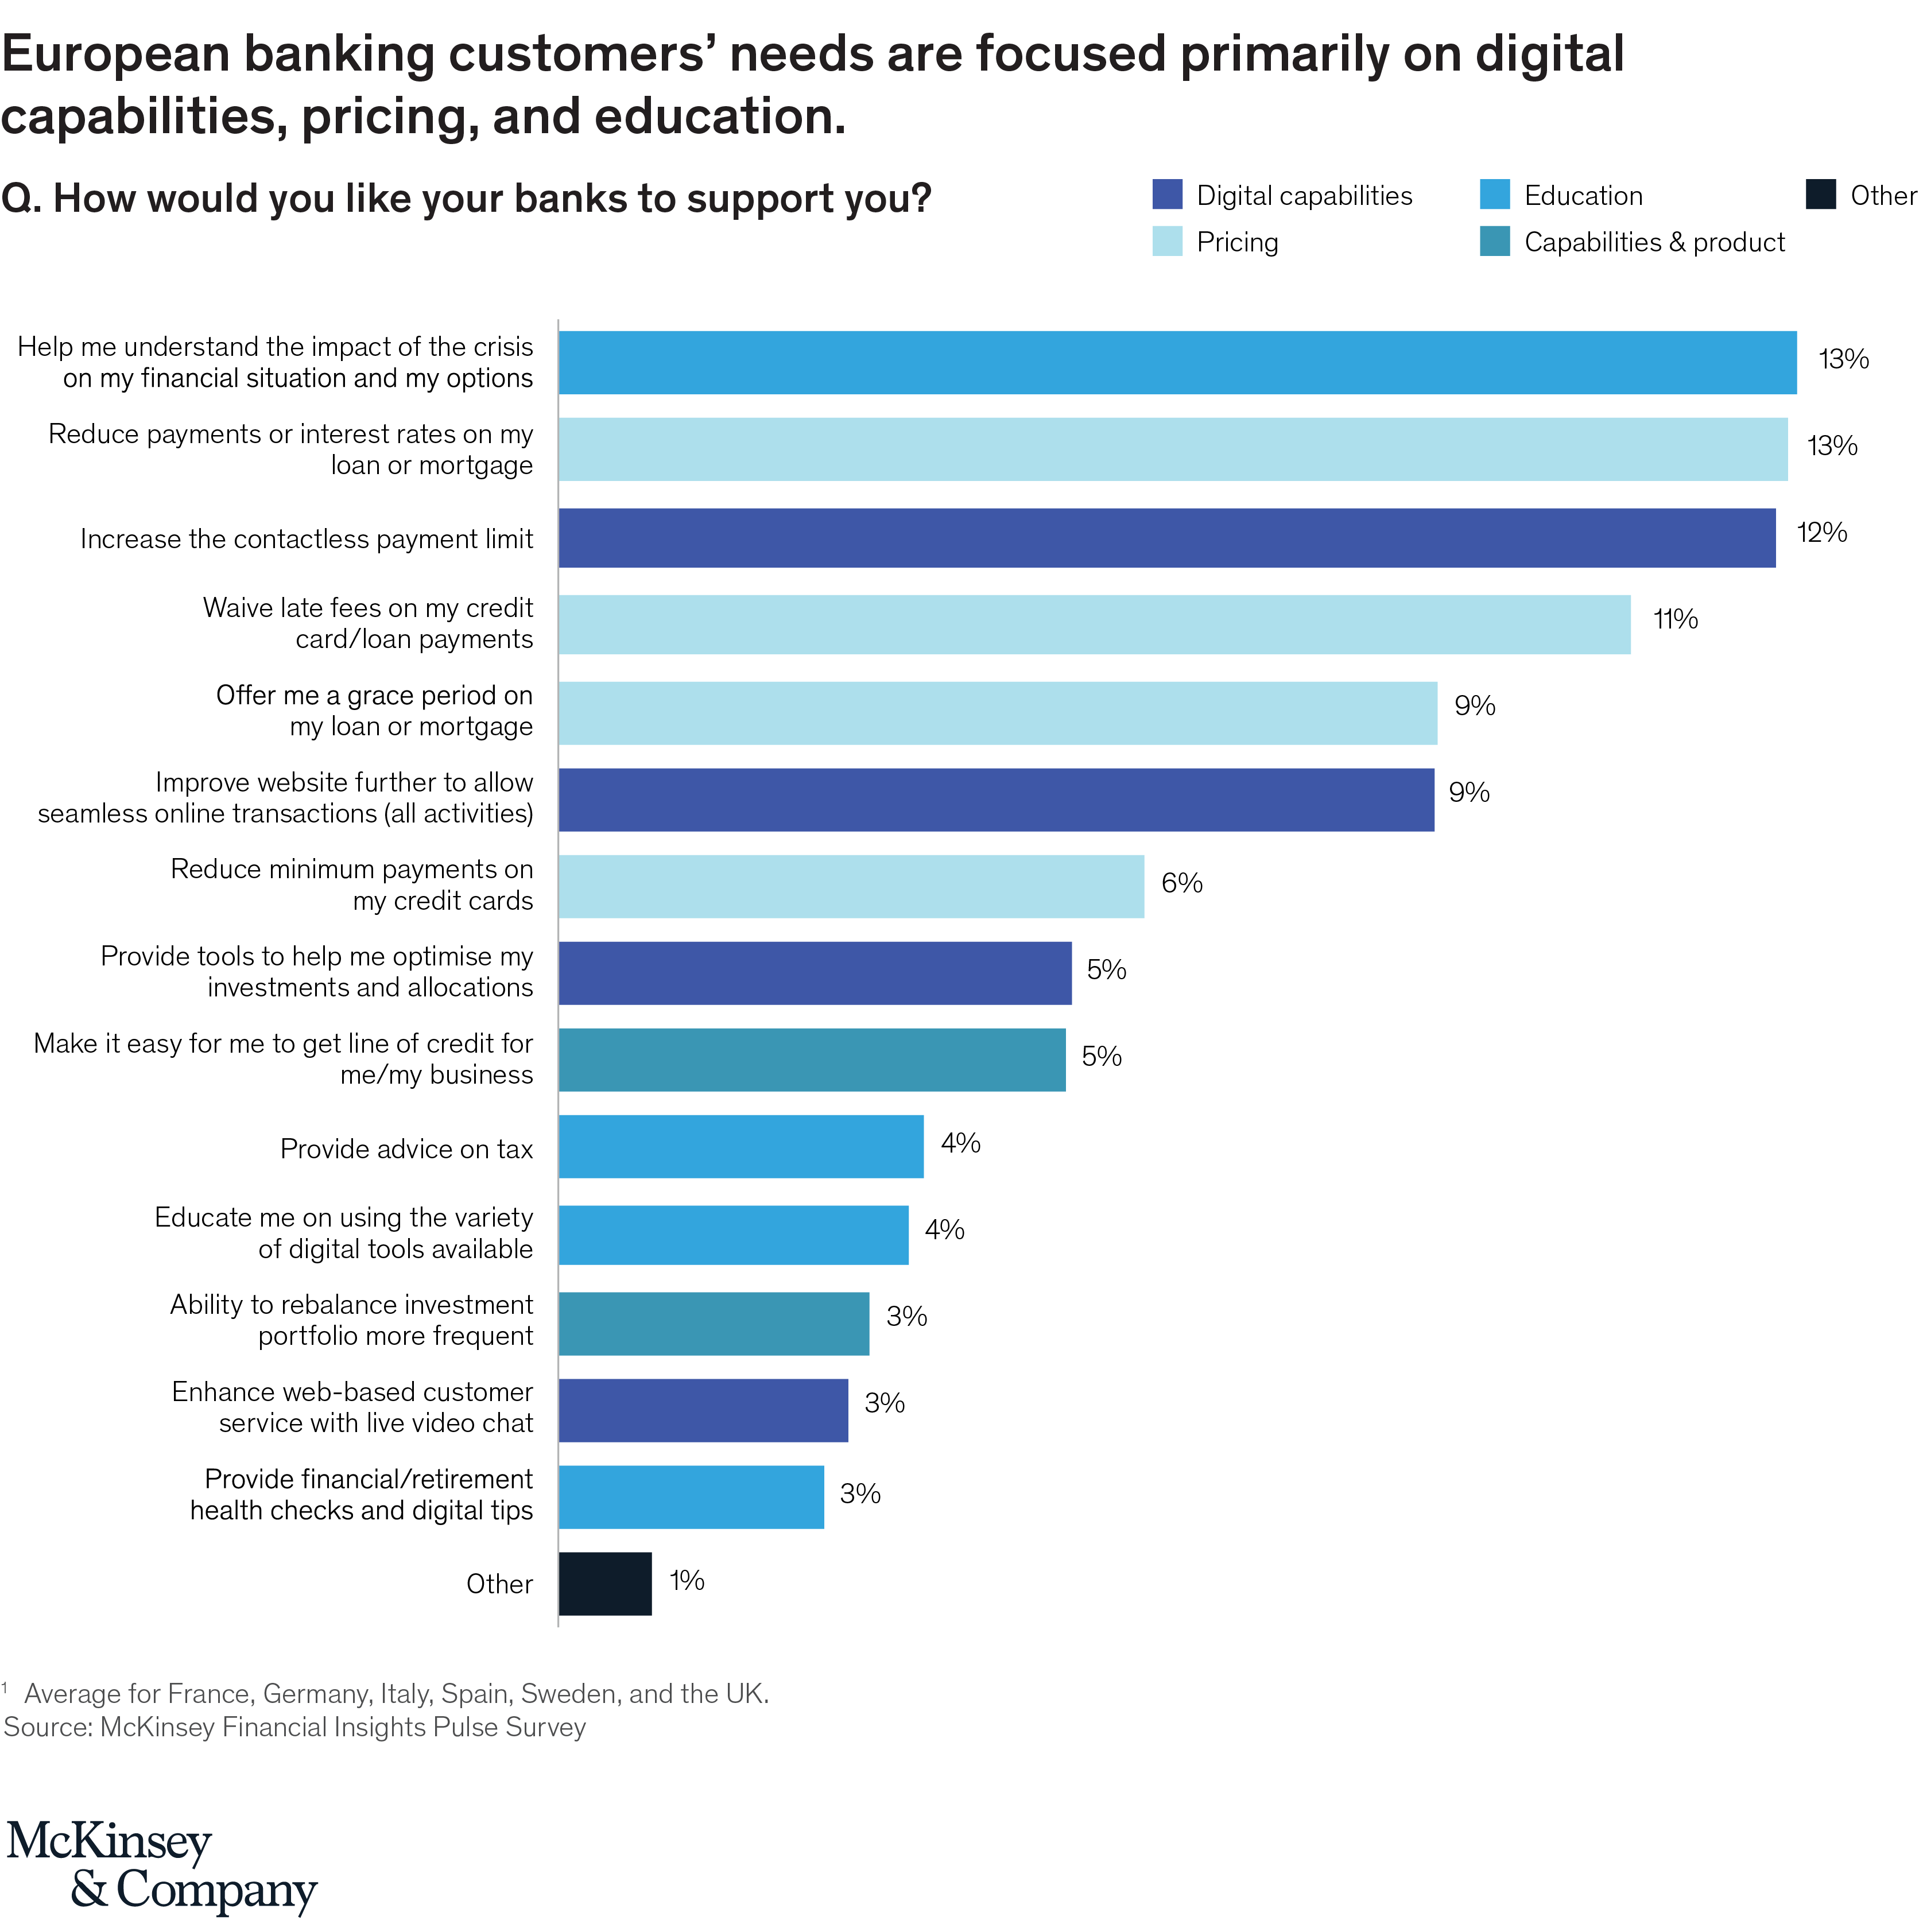 European consumer finance: Moving to a “next normal” | McKinsey & Company